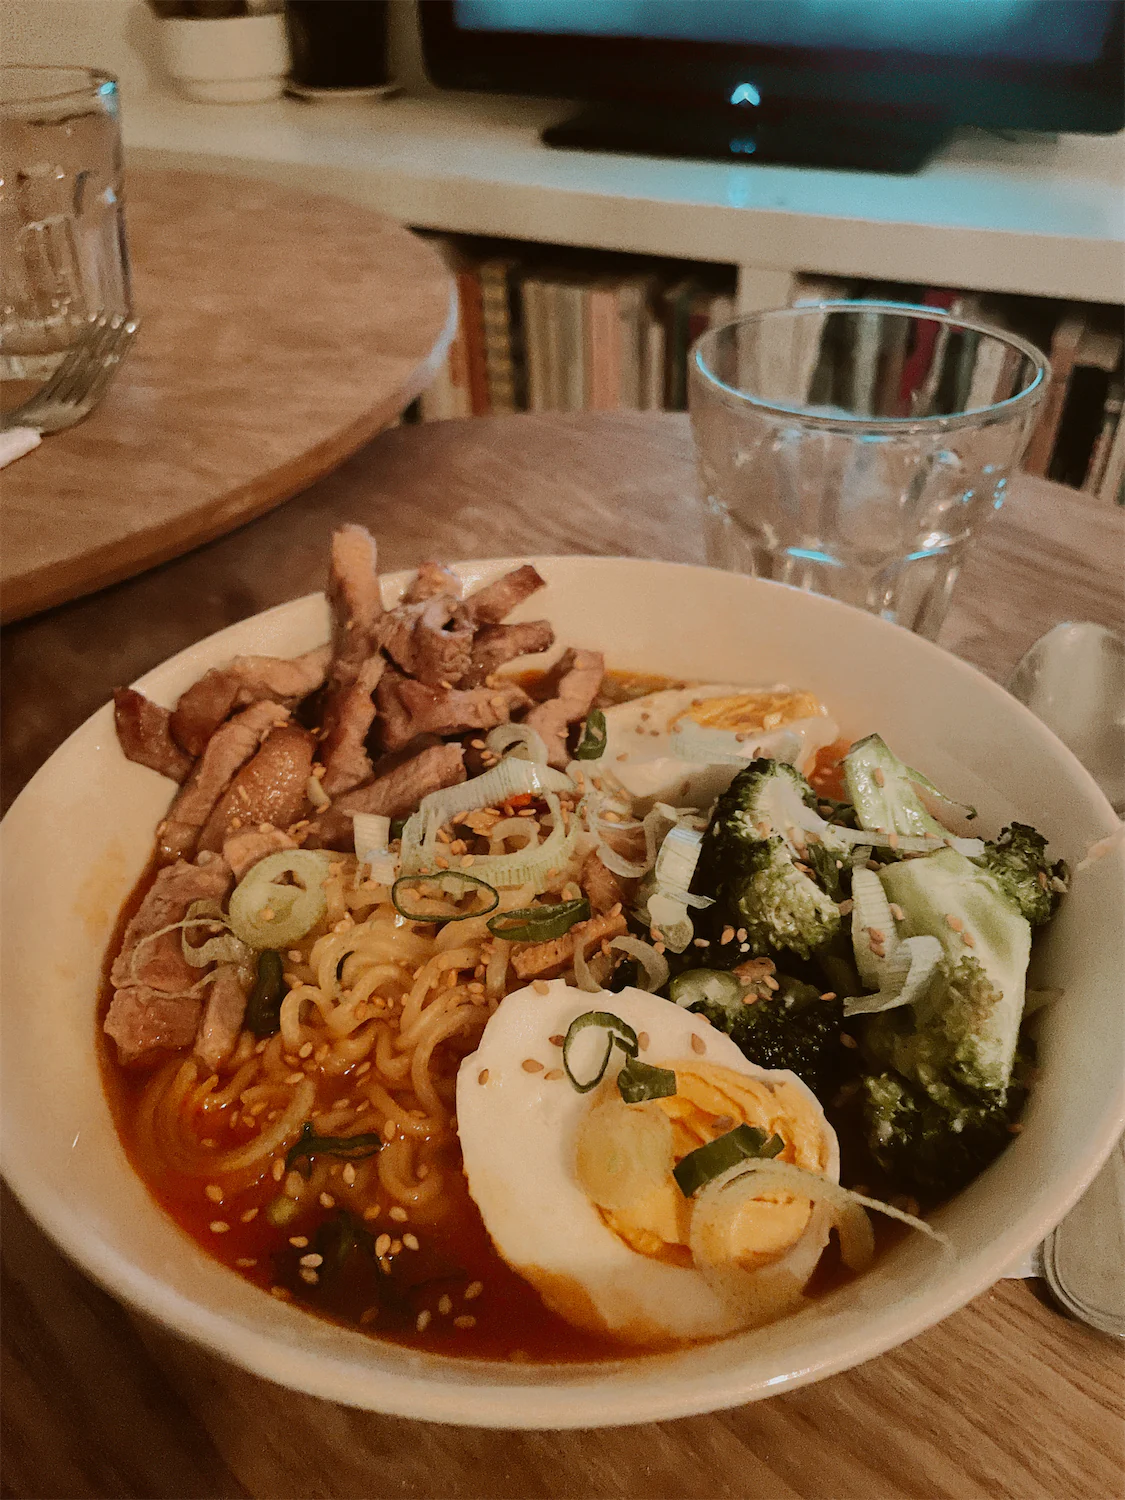 Photography of a ramen dish that the founders of Bendito Mockup had for dinner the night before their product launch.